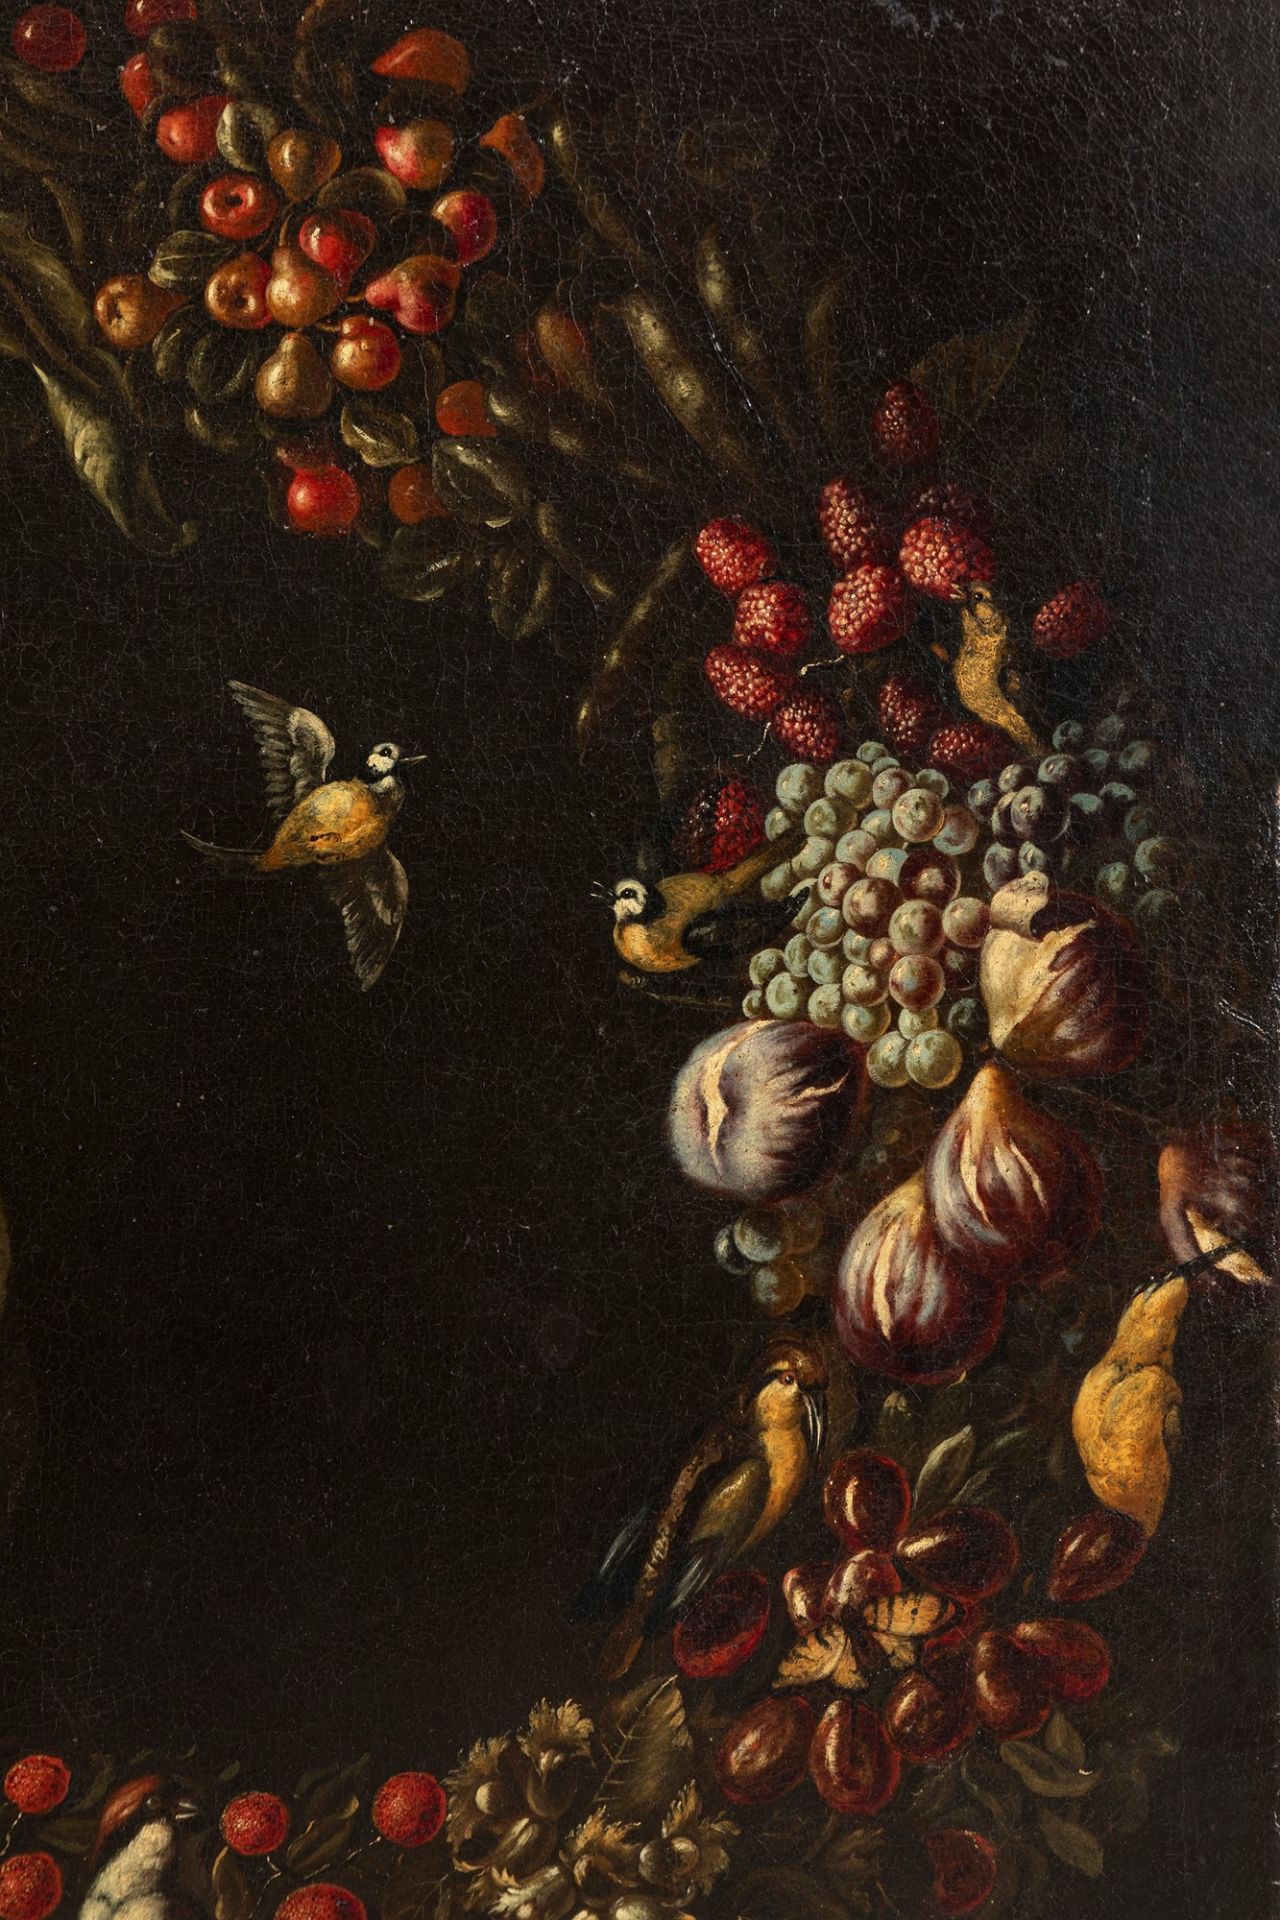 Neapolitan school, XVII century - Garland of fruit and vegetables with white peacock and other birds - Image 5 of 7